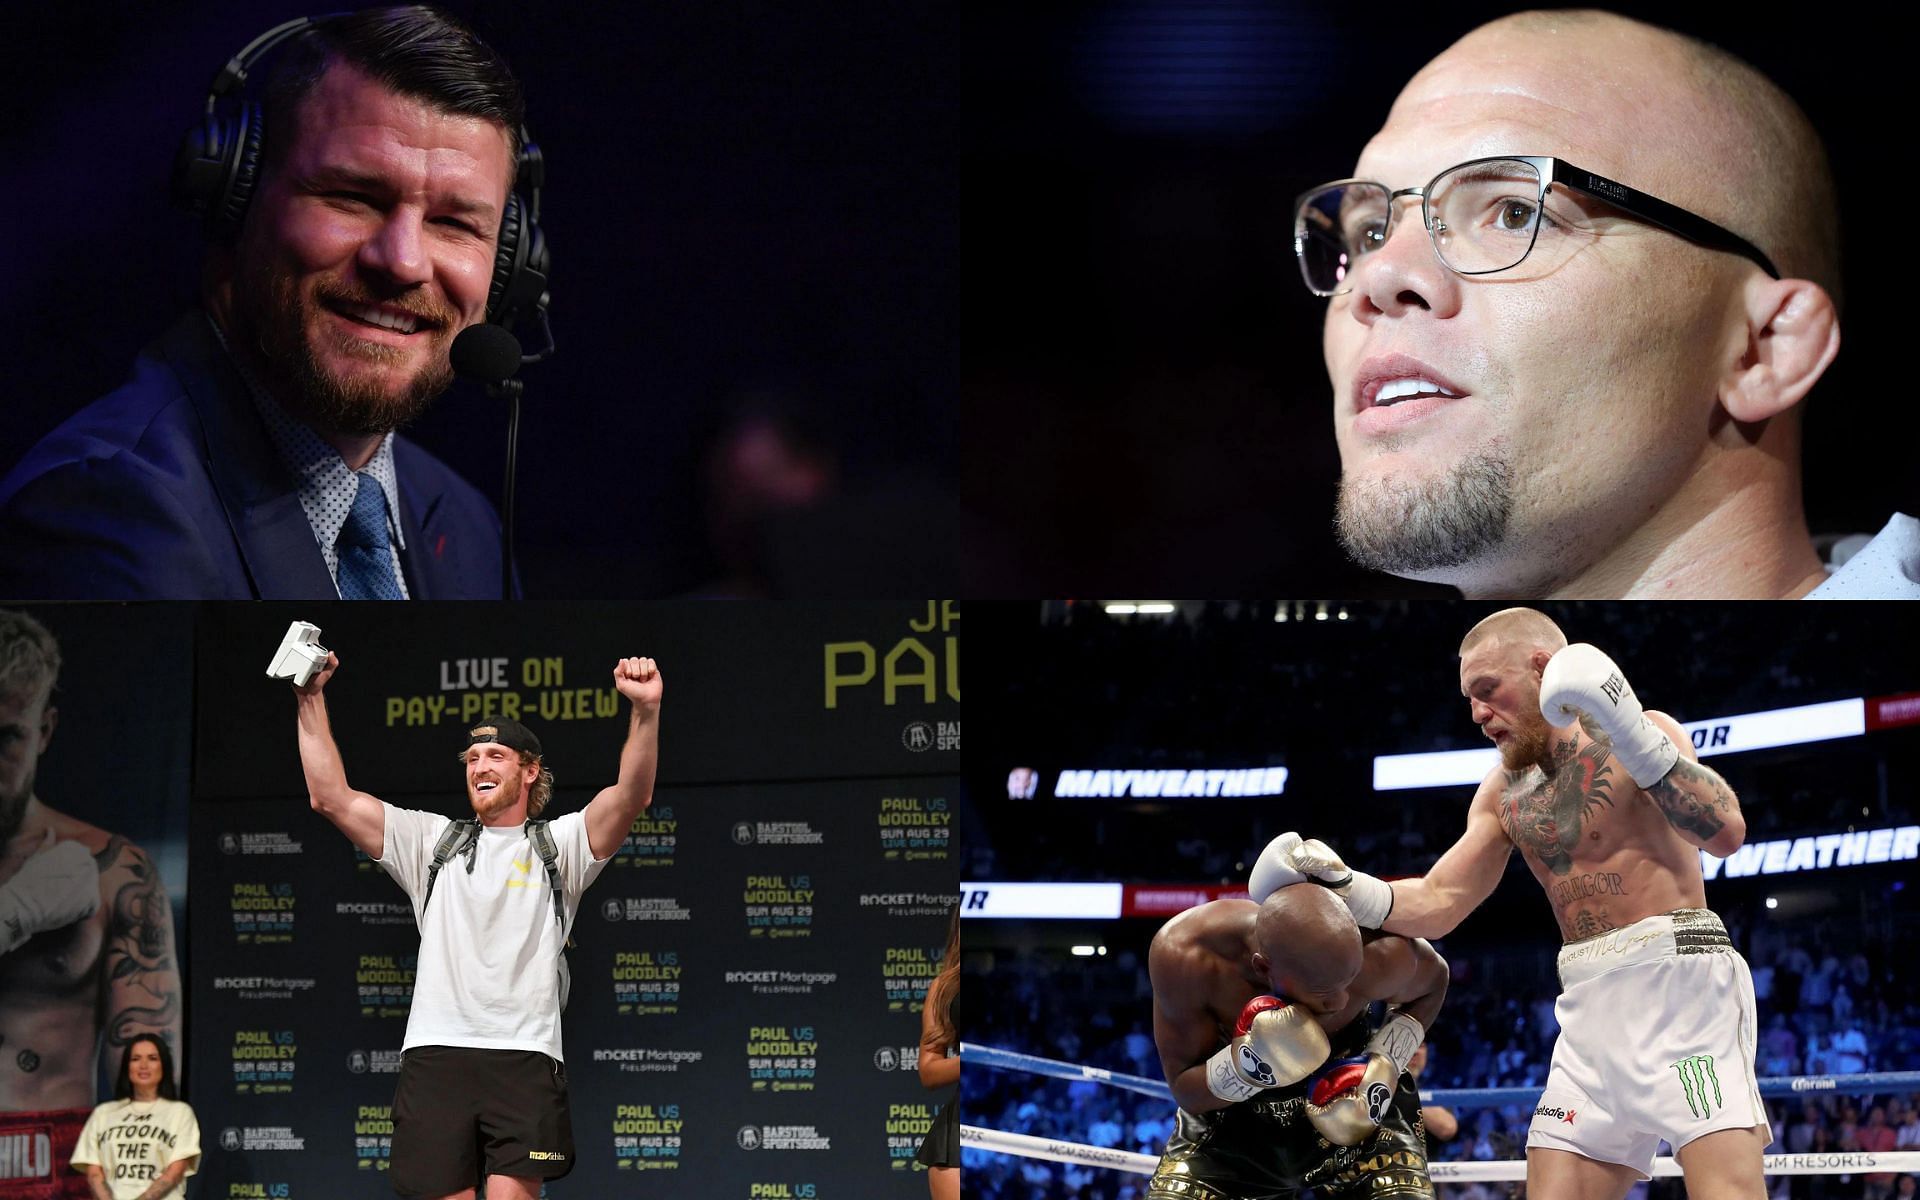 Michael Bisping (top left), Anthony Smith (top right), Logan Paul (bottom left), and Floyd Mayweather vs. Conor McGregor (bottom right) [Images courtesy of Getty]